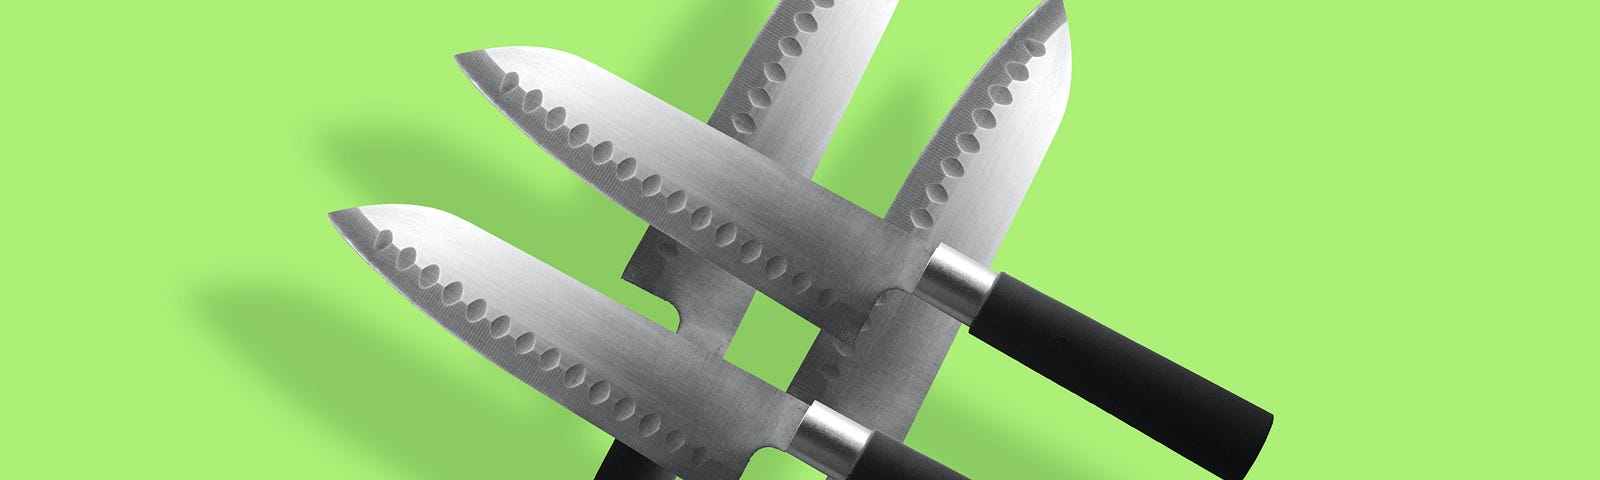 Image of 4 knives on a green background.